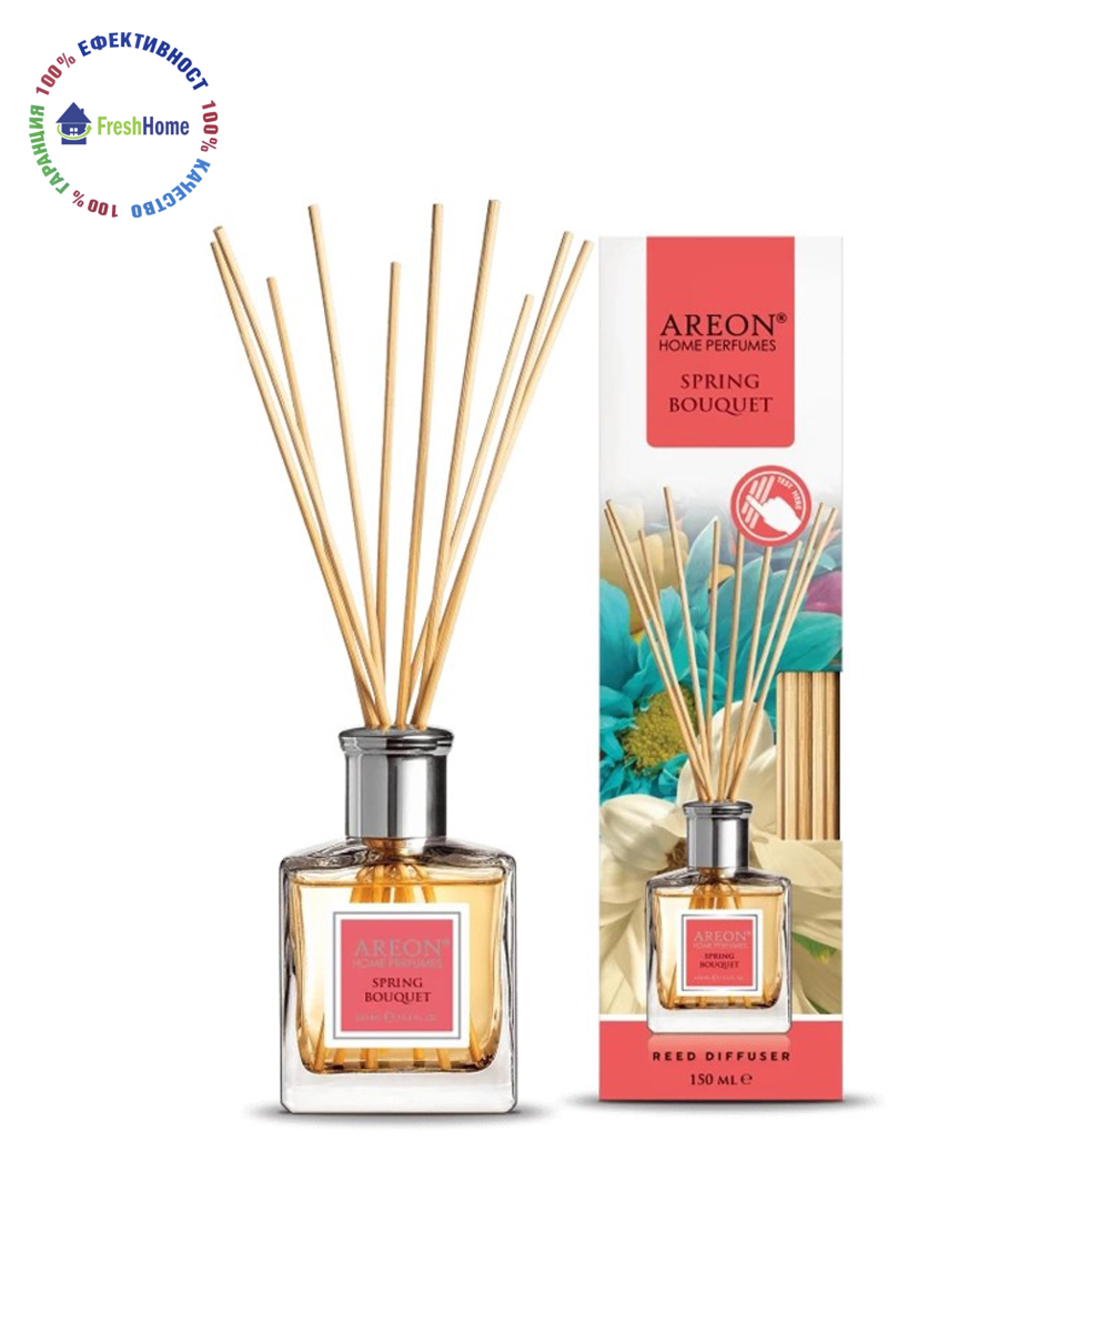 AREON HOME PERFUMES Spring Bouquet 150 ml. парфюм за дома/ офиса